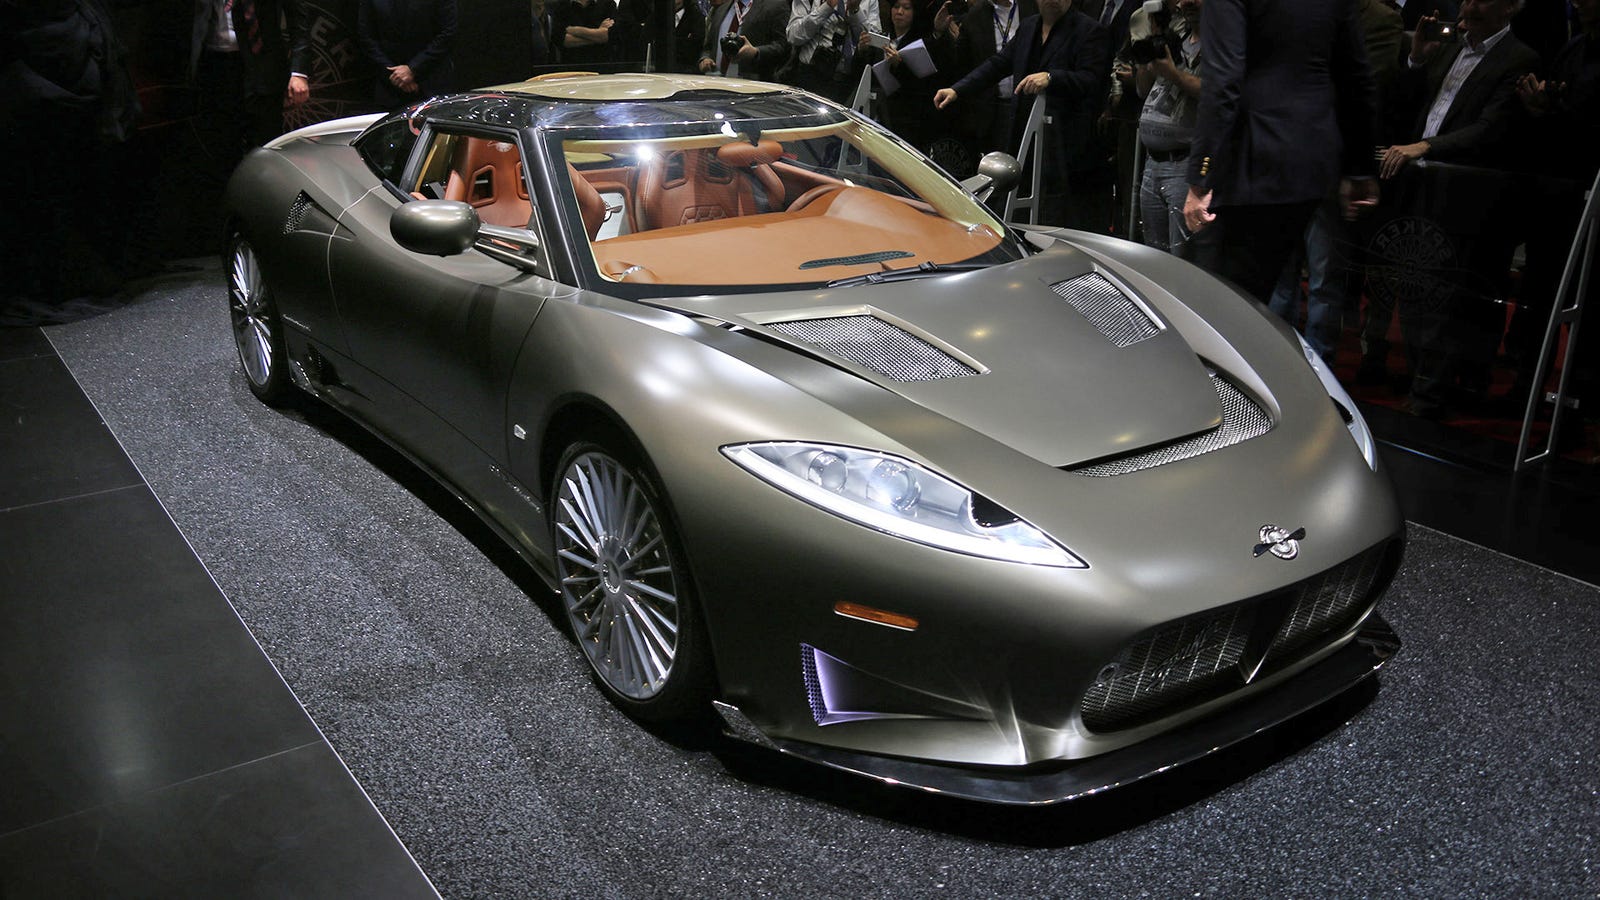 Spyker Is Back With 525 HP From Audi And Exposed Manual Gearboxes